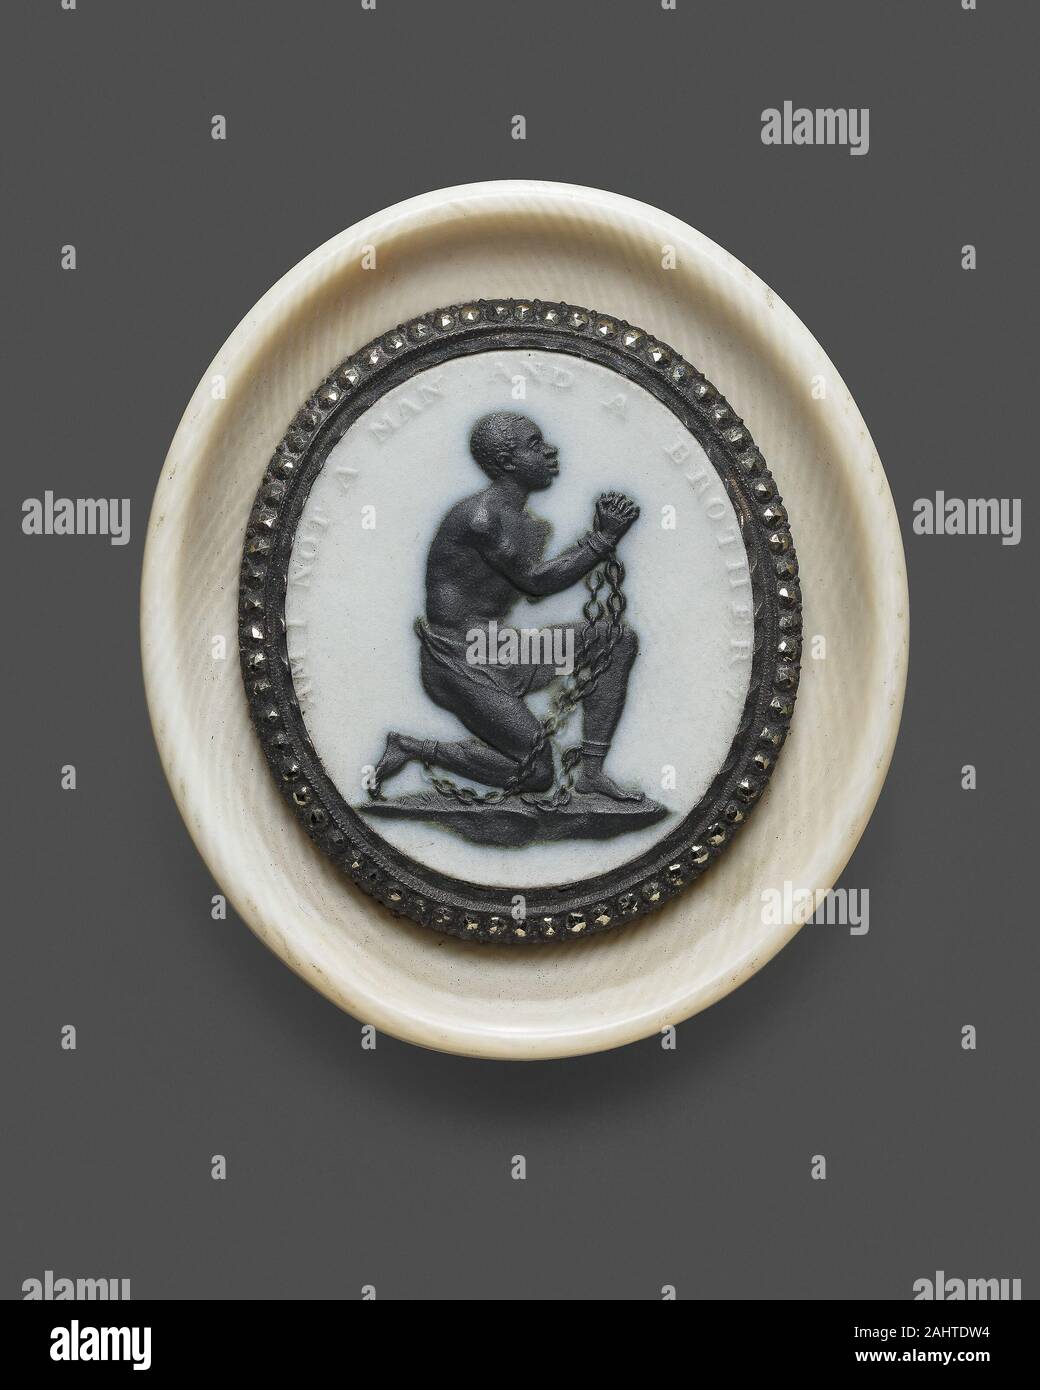 Wedgwood Manufactory (Manufacturer). Anti-Slavery Medallion. 1787. Burslem. Stoneware (jasperware and black basalt), cut steel, and ivory A man of African descent, kneeling and shackled in chains, poses the powerful question Am I not a Man and a Brother Employing a stark contrast of black against a white background, here the Wedgwood pottery used its famous jasperware technique to tackle an issue dear to its founders’ heart the abolition of the slave trade. Josiah Wedgwood was part of a prominent circle of antislavery reformers and entrepreneurs, along with activist Thomas Clarkson and the phy Stock Photo